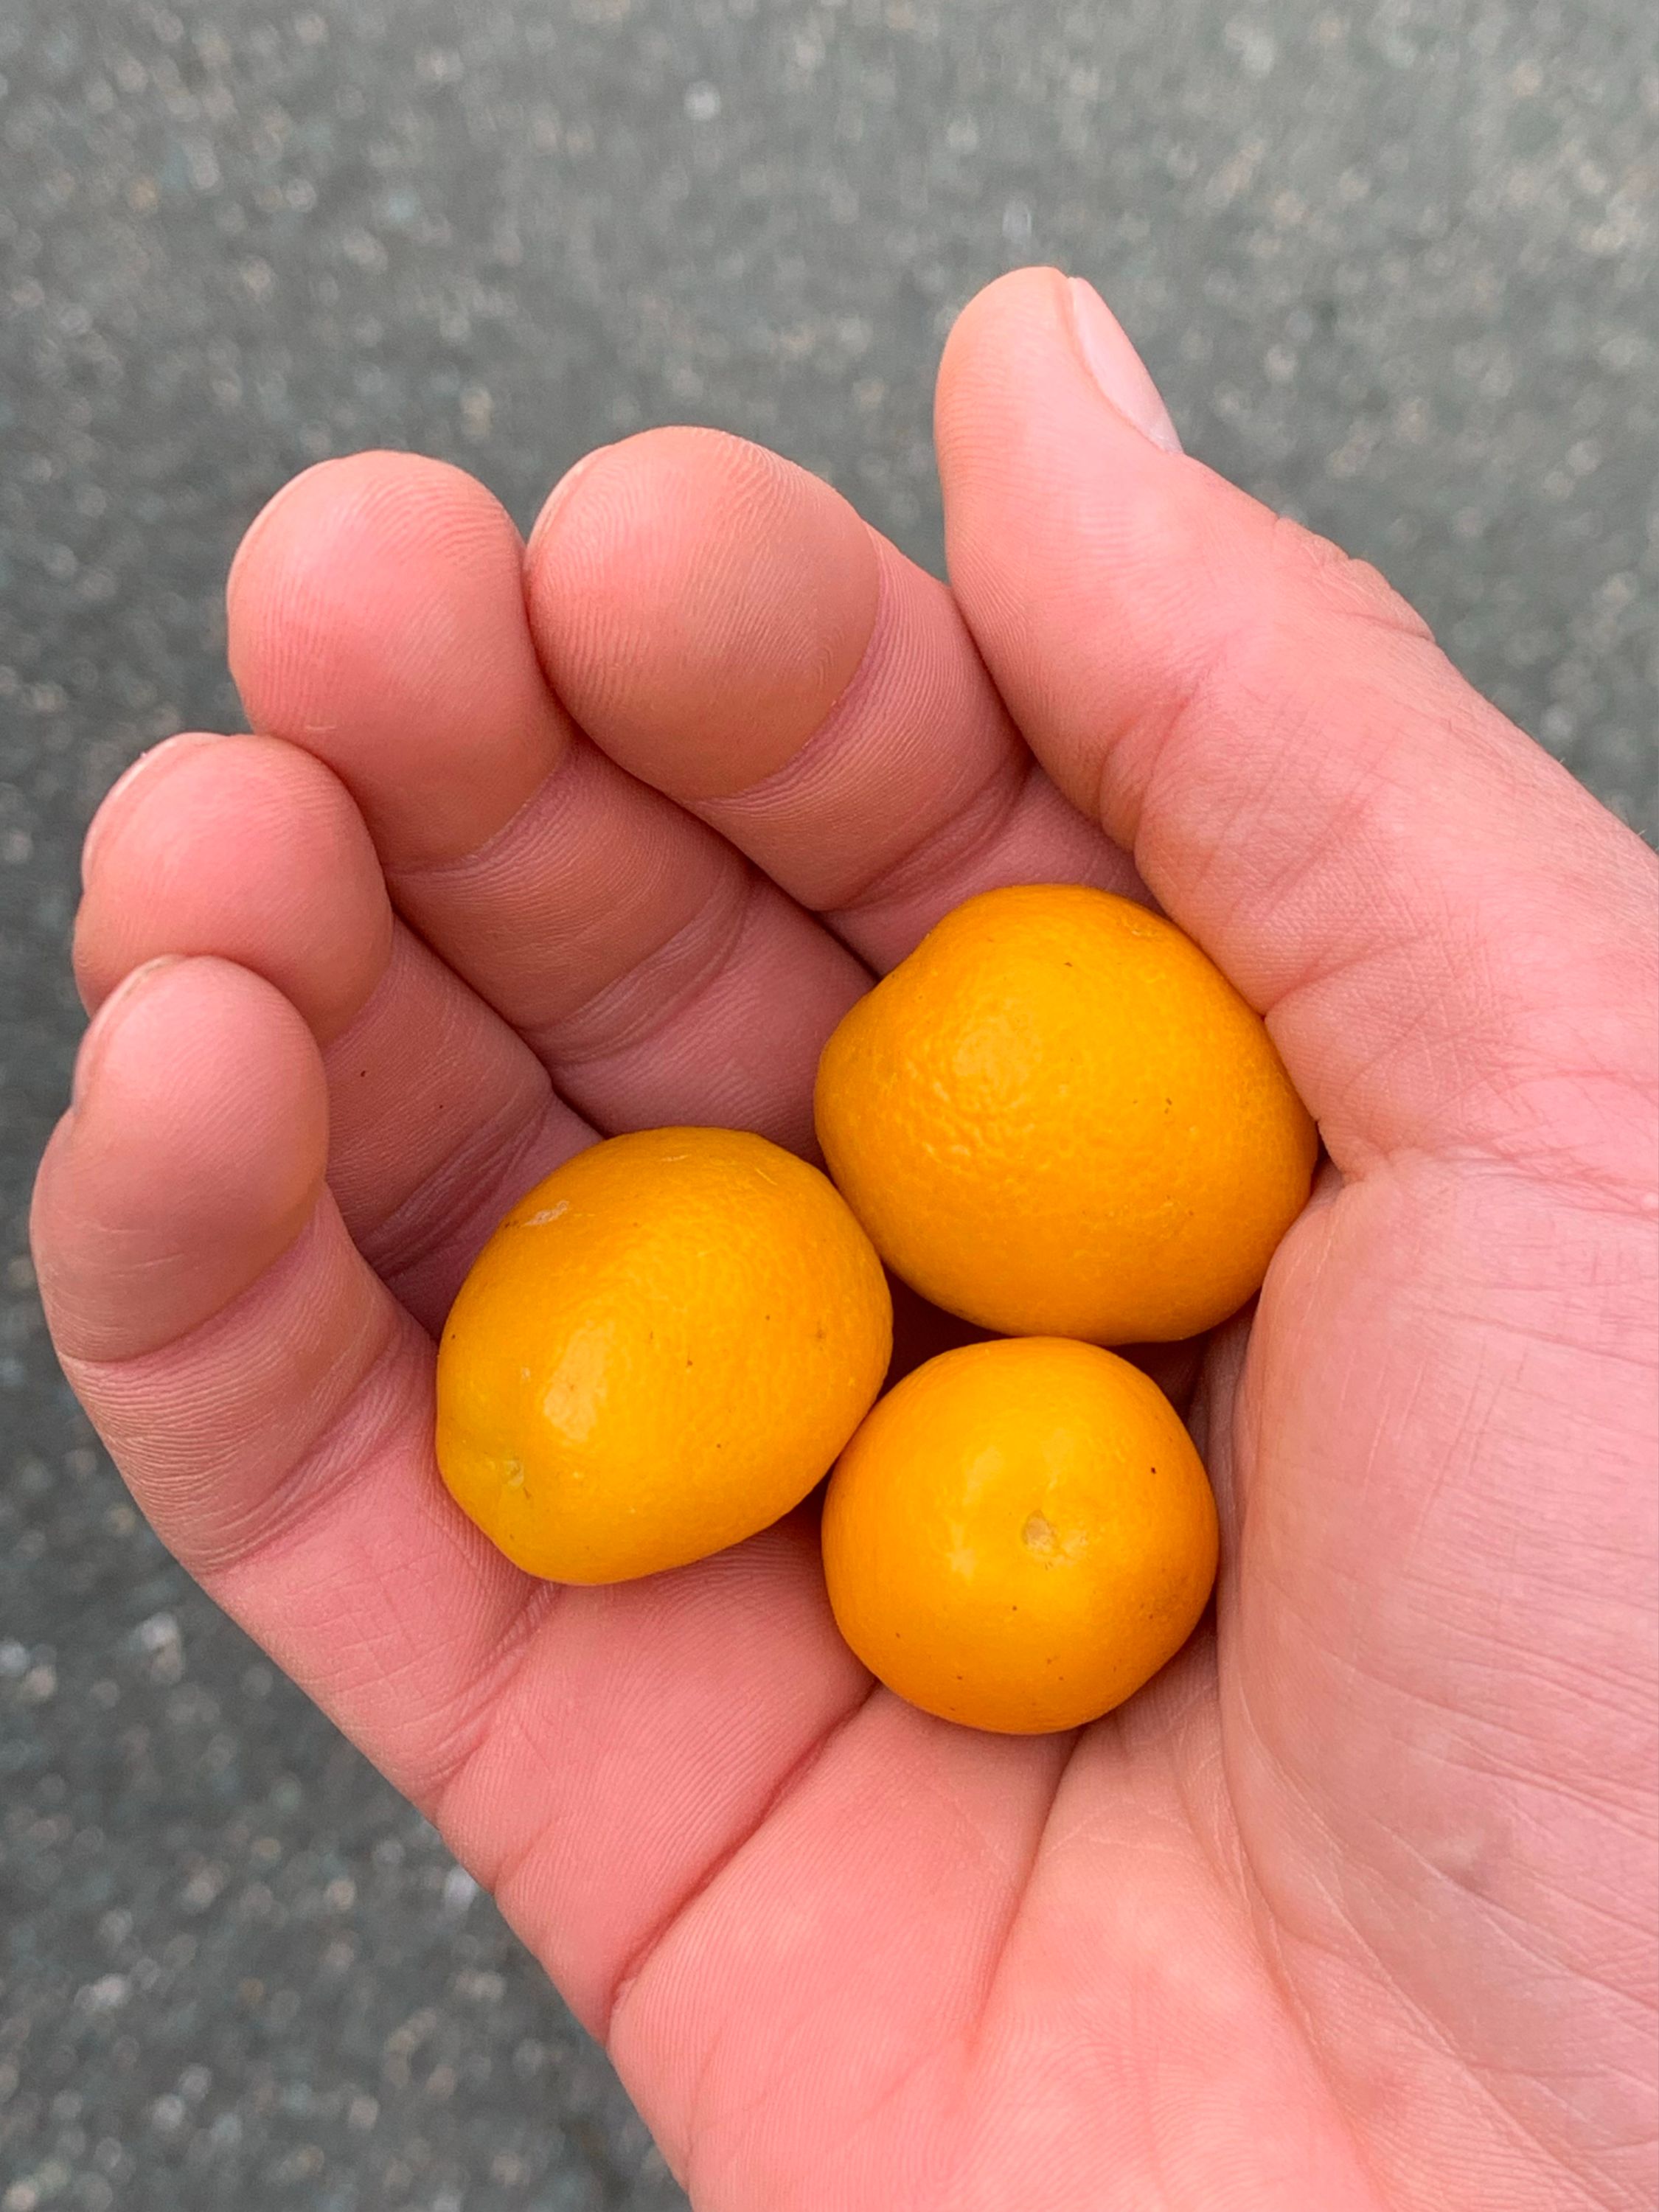 A right hand, without gloves, holds three kumquats.